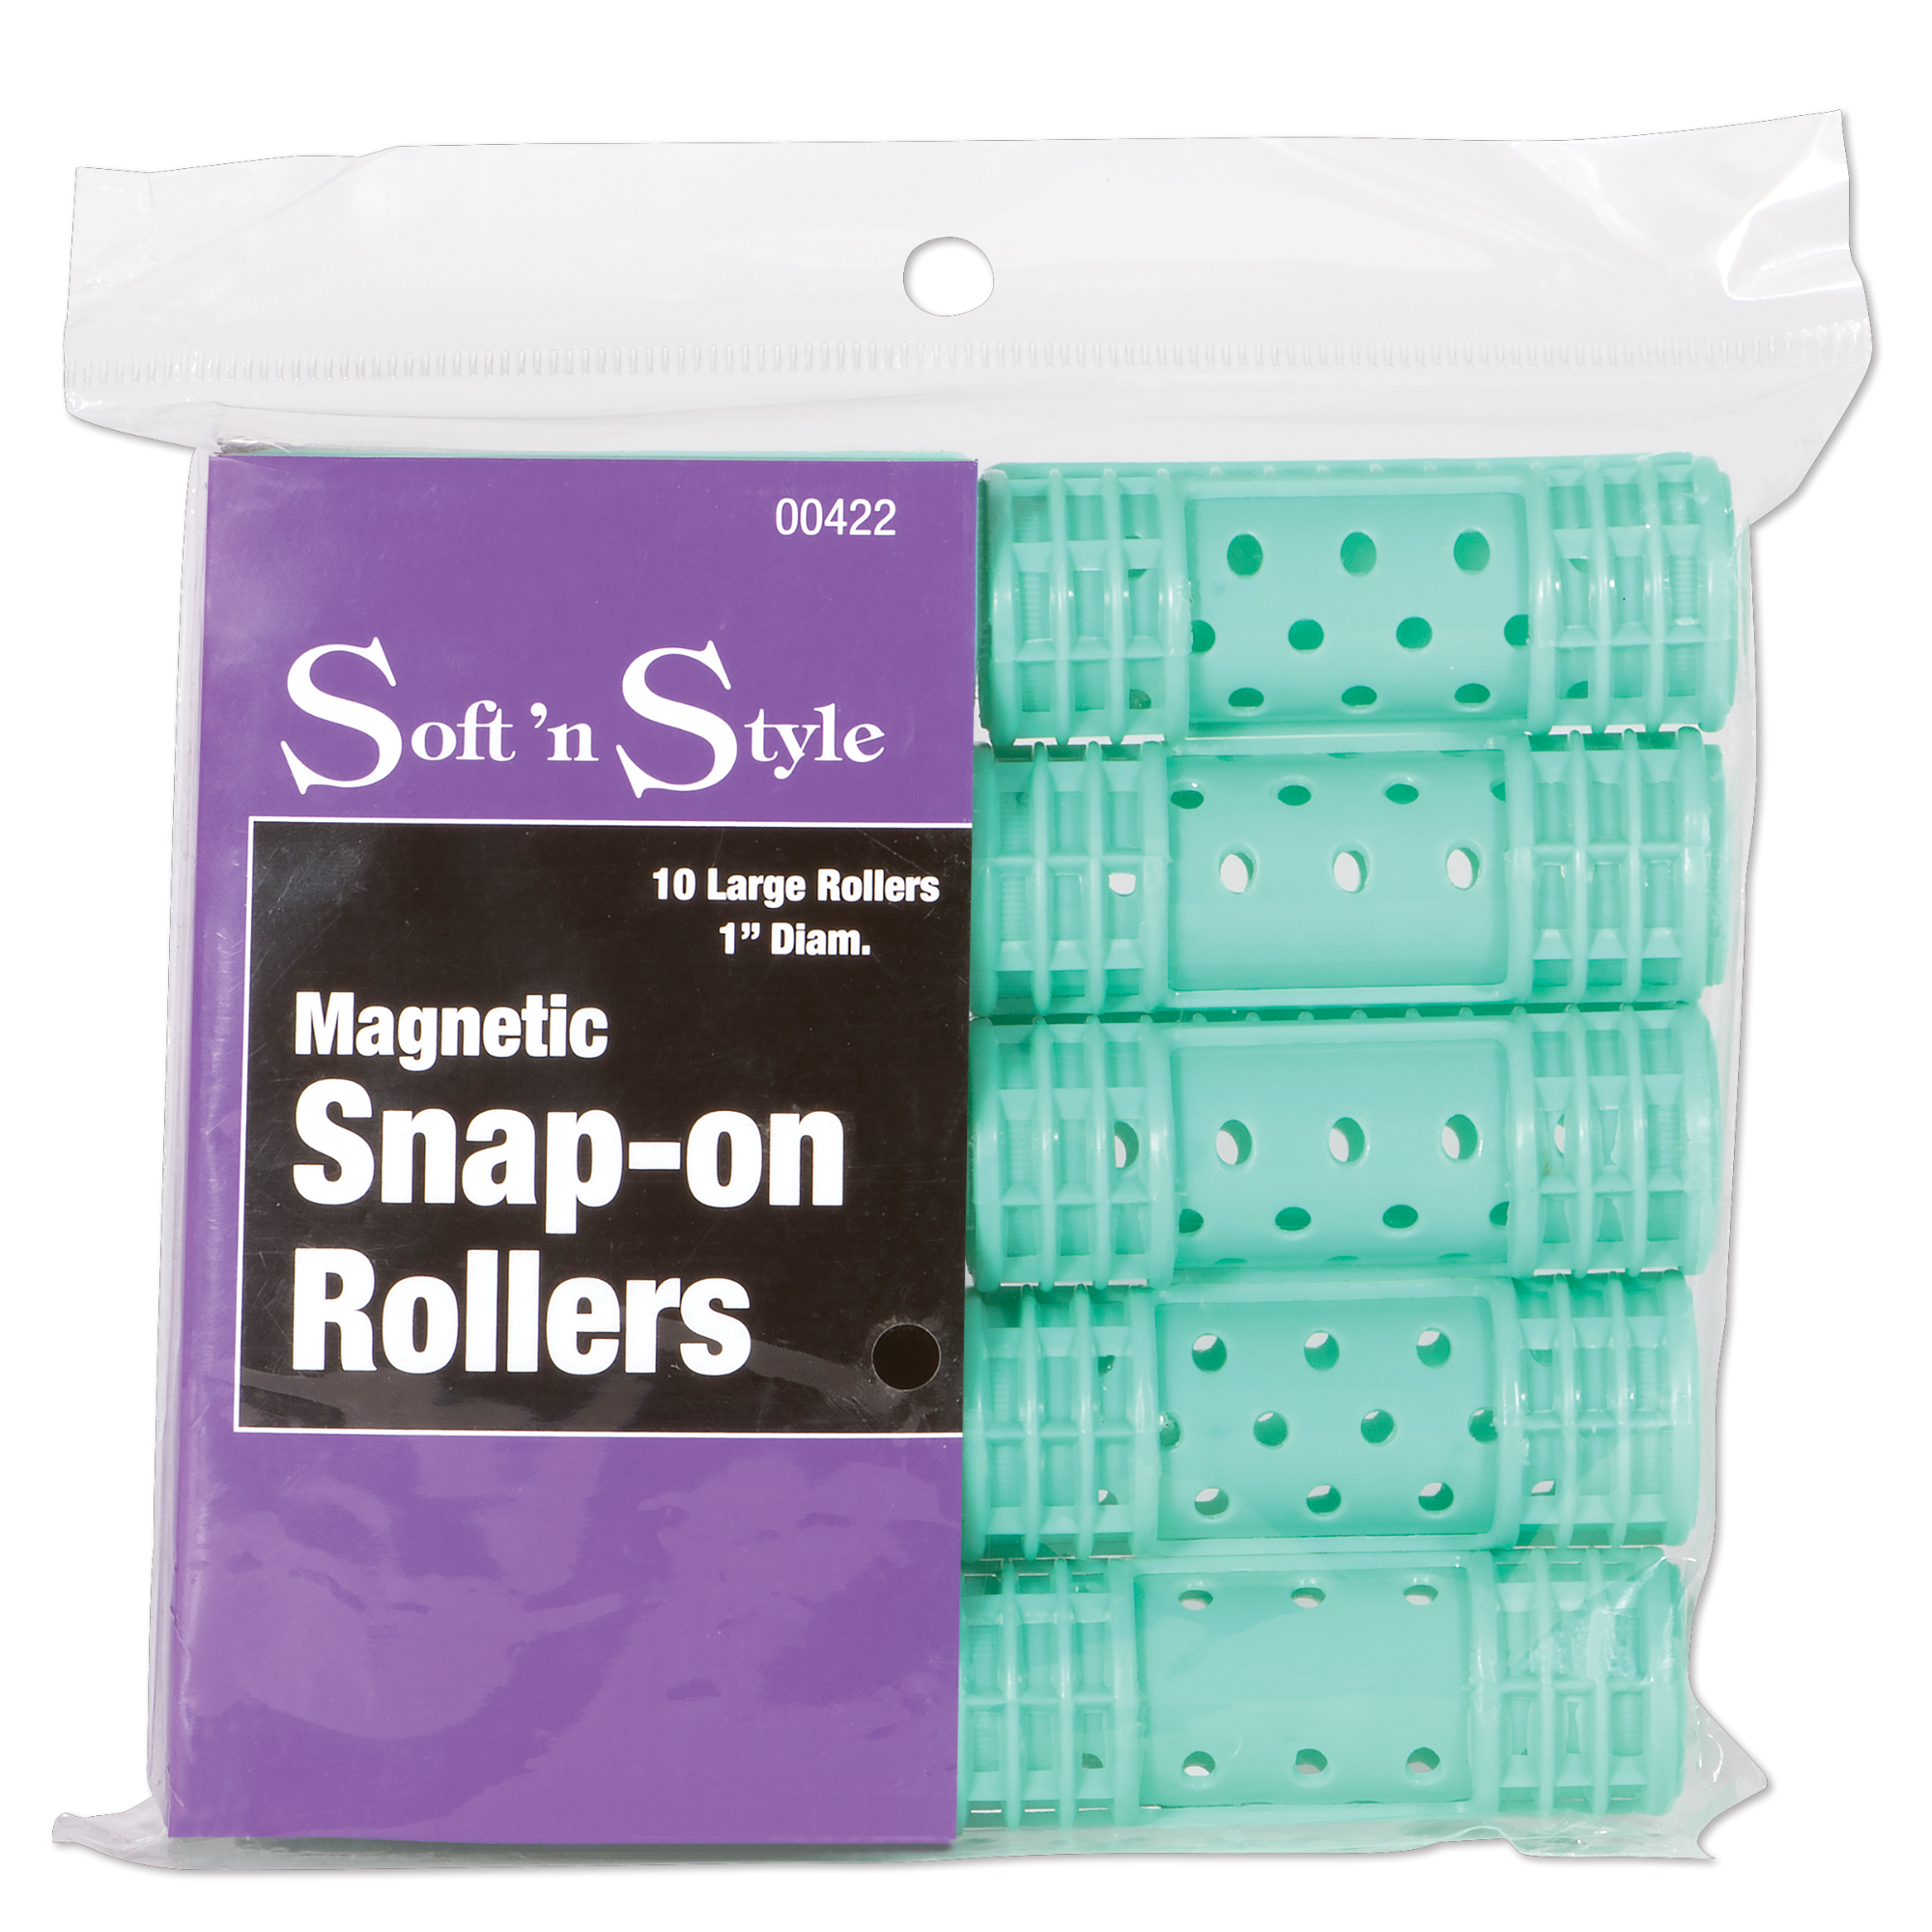 Magnetic Snap-on Rollers, Large - 1"